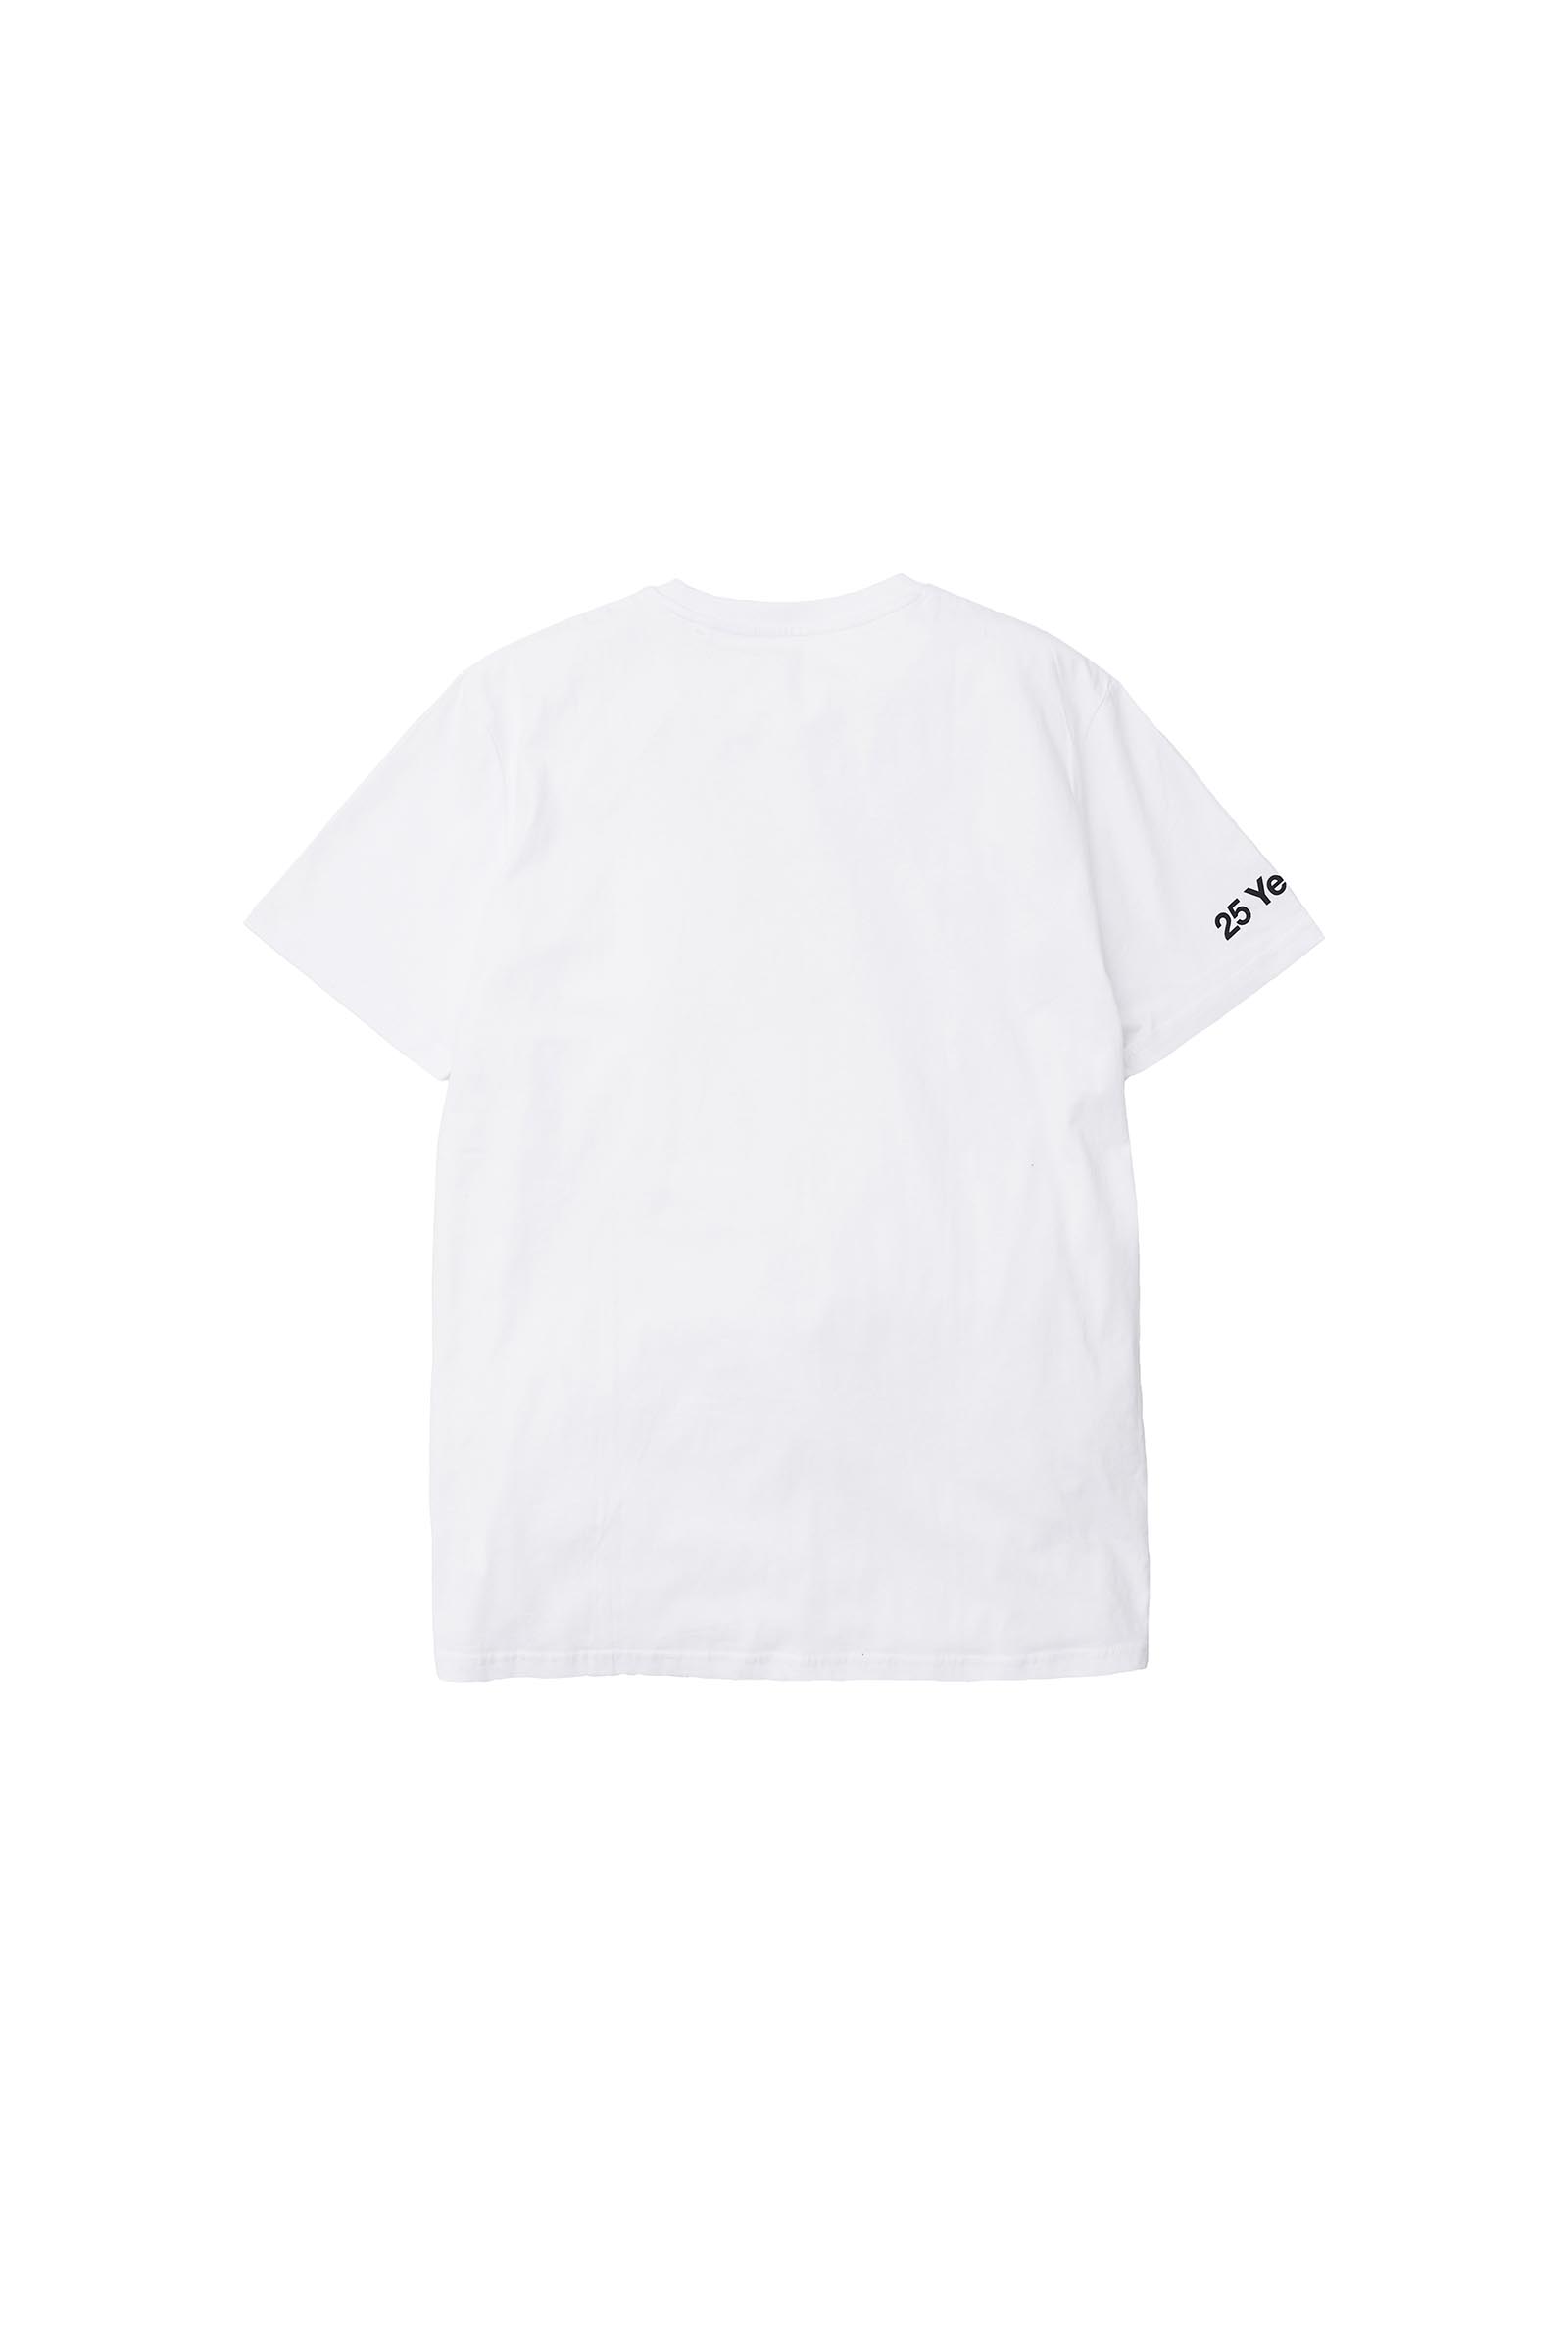 BLESS / MULTICOLLECTION II T-SHIRT